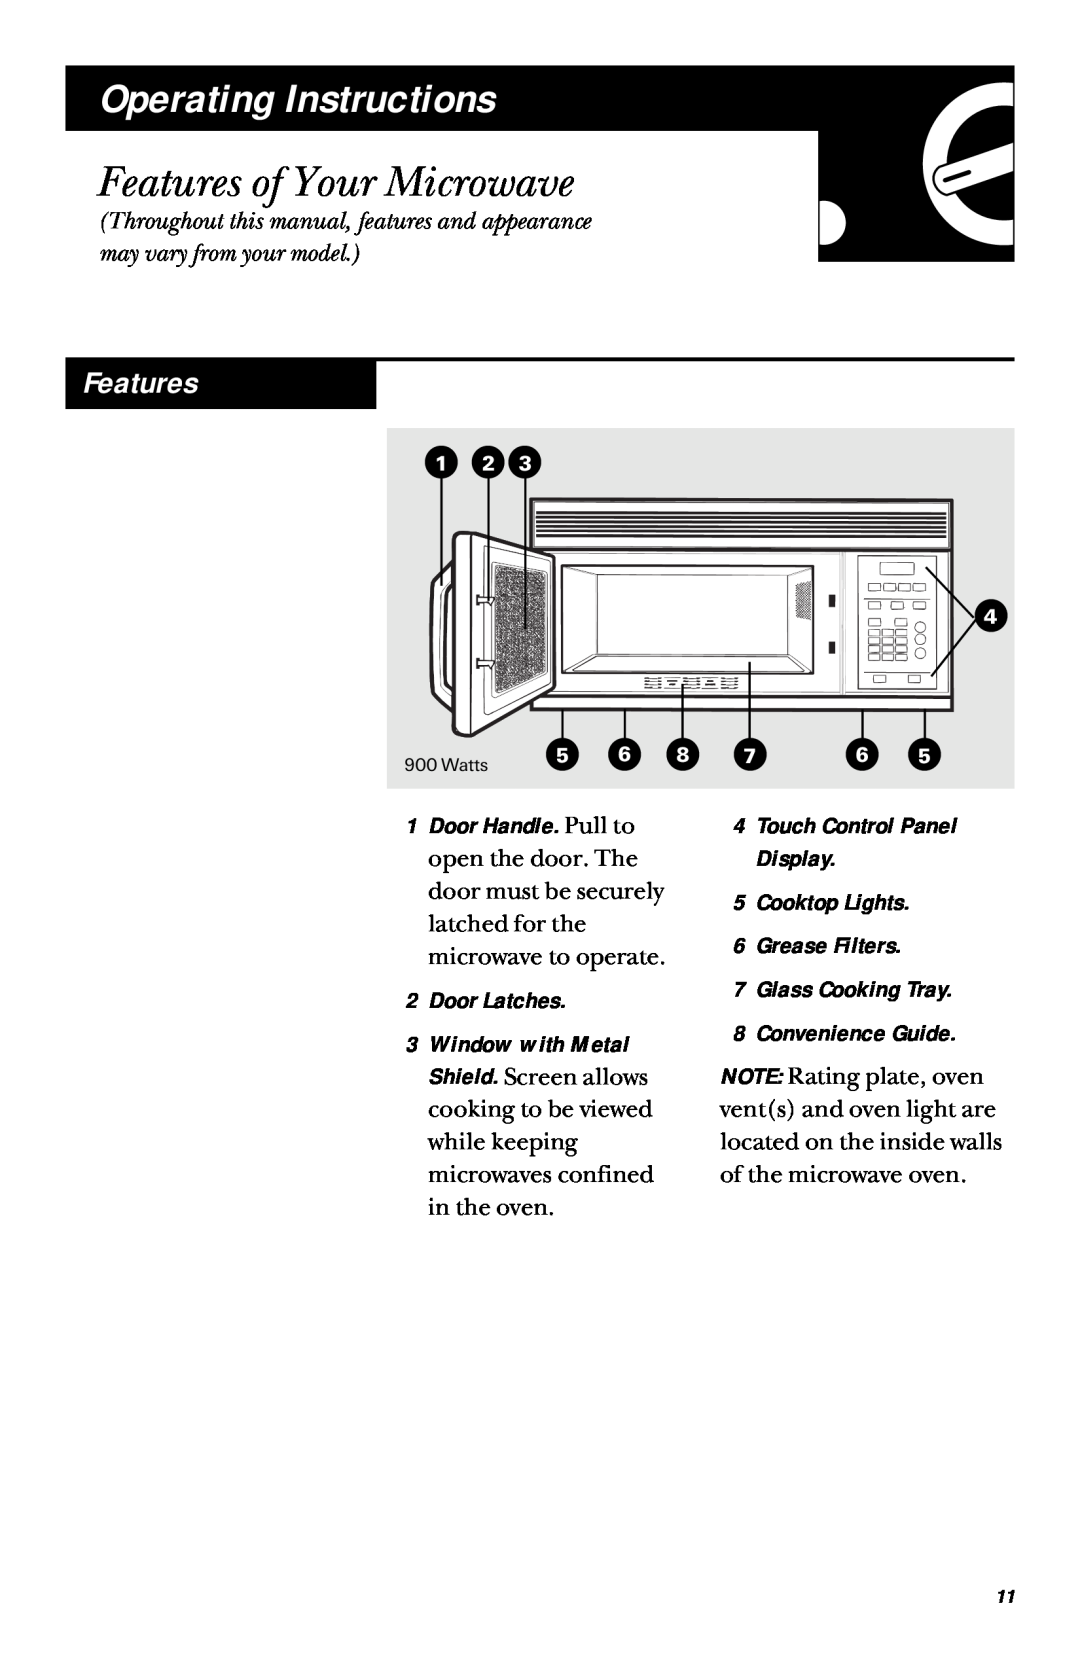 GE JVM1431 manual Operating Instructions, Features of Your Microwave, Door Latches, Glass Cooking Tray 8 Convenience Guide 